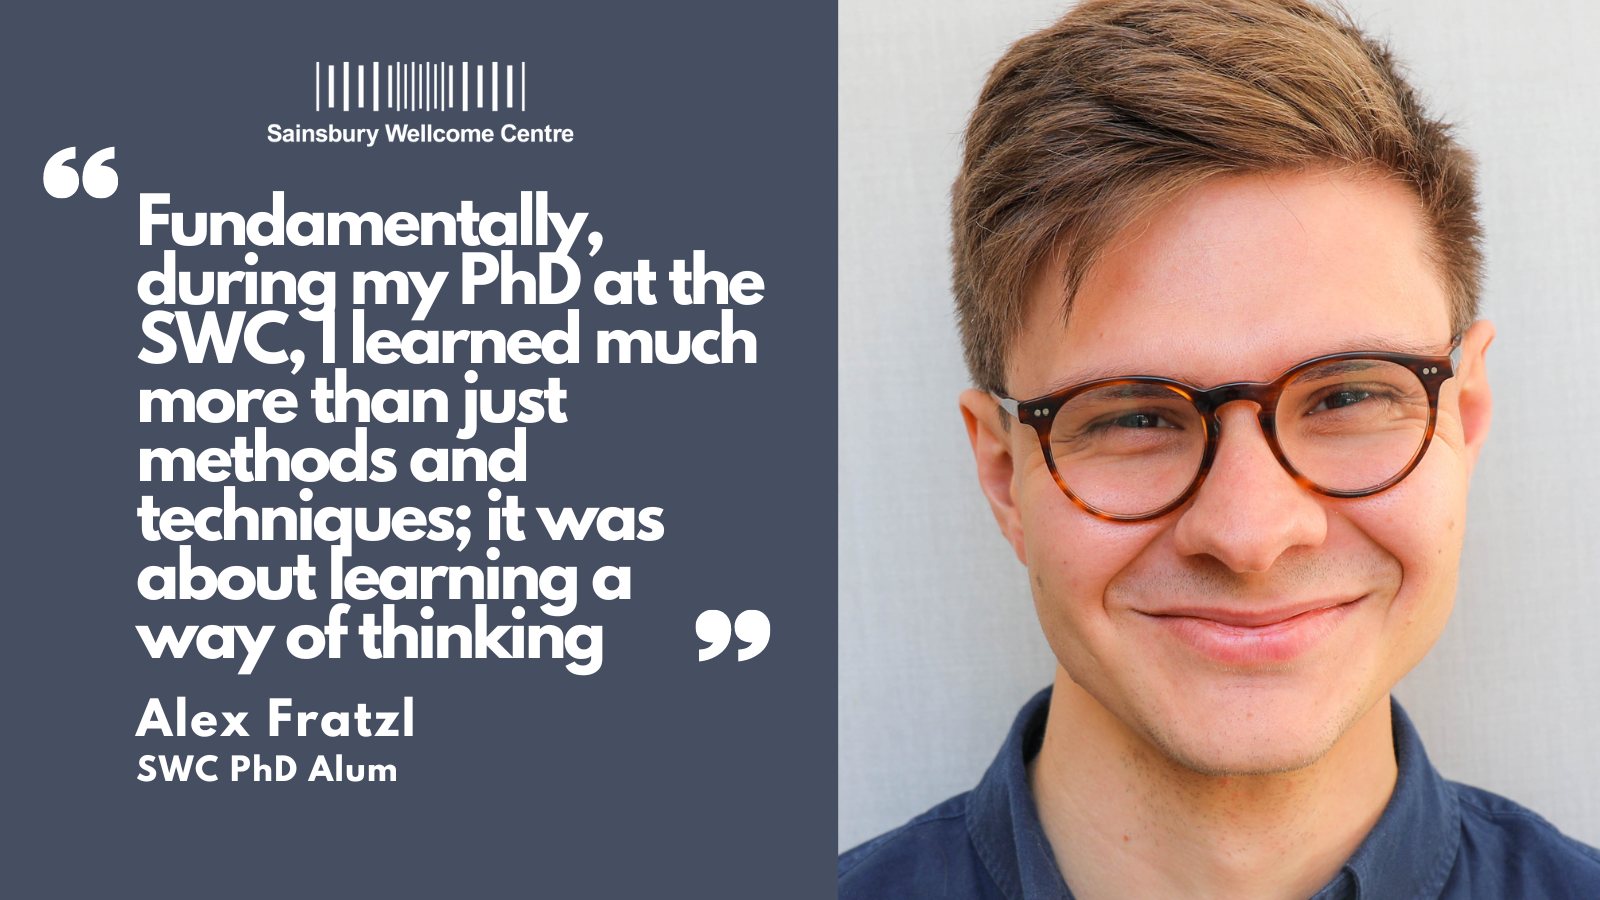 Alex Fratzl photo and quote "Fundamentally during my PhD at the SWC, I learned much more than just methods and techniques; it was about learning a way of thinking"